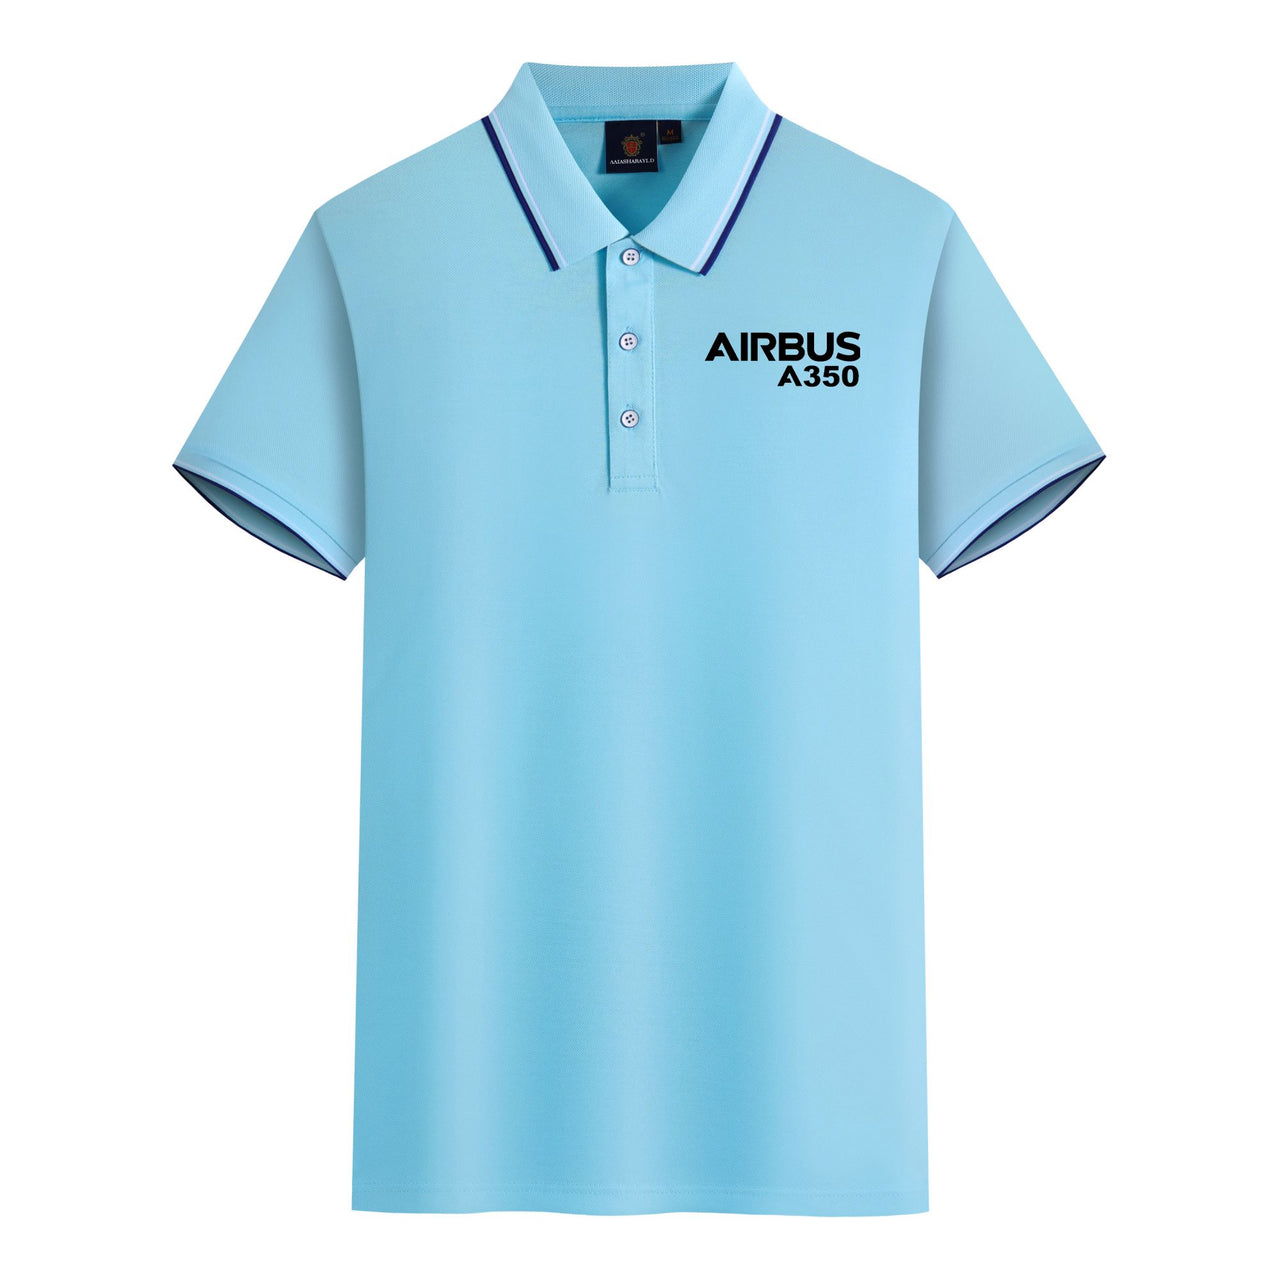 Airbus A350 & Text Designed Stylish Polo T-Shirts